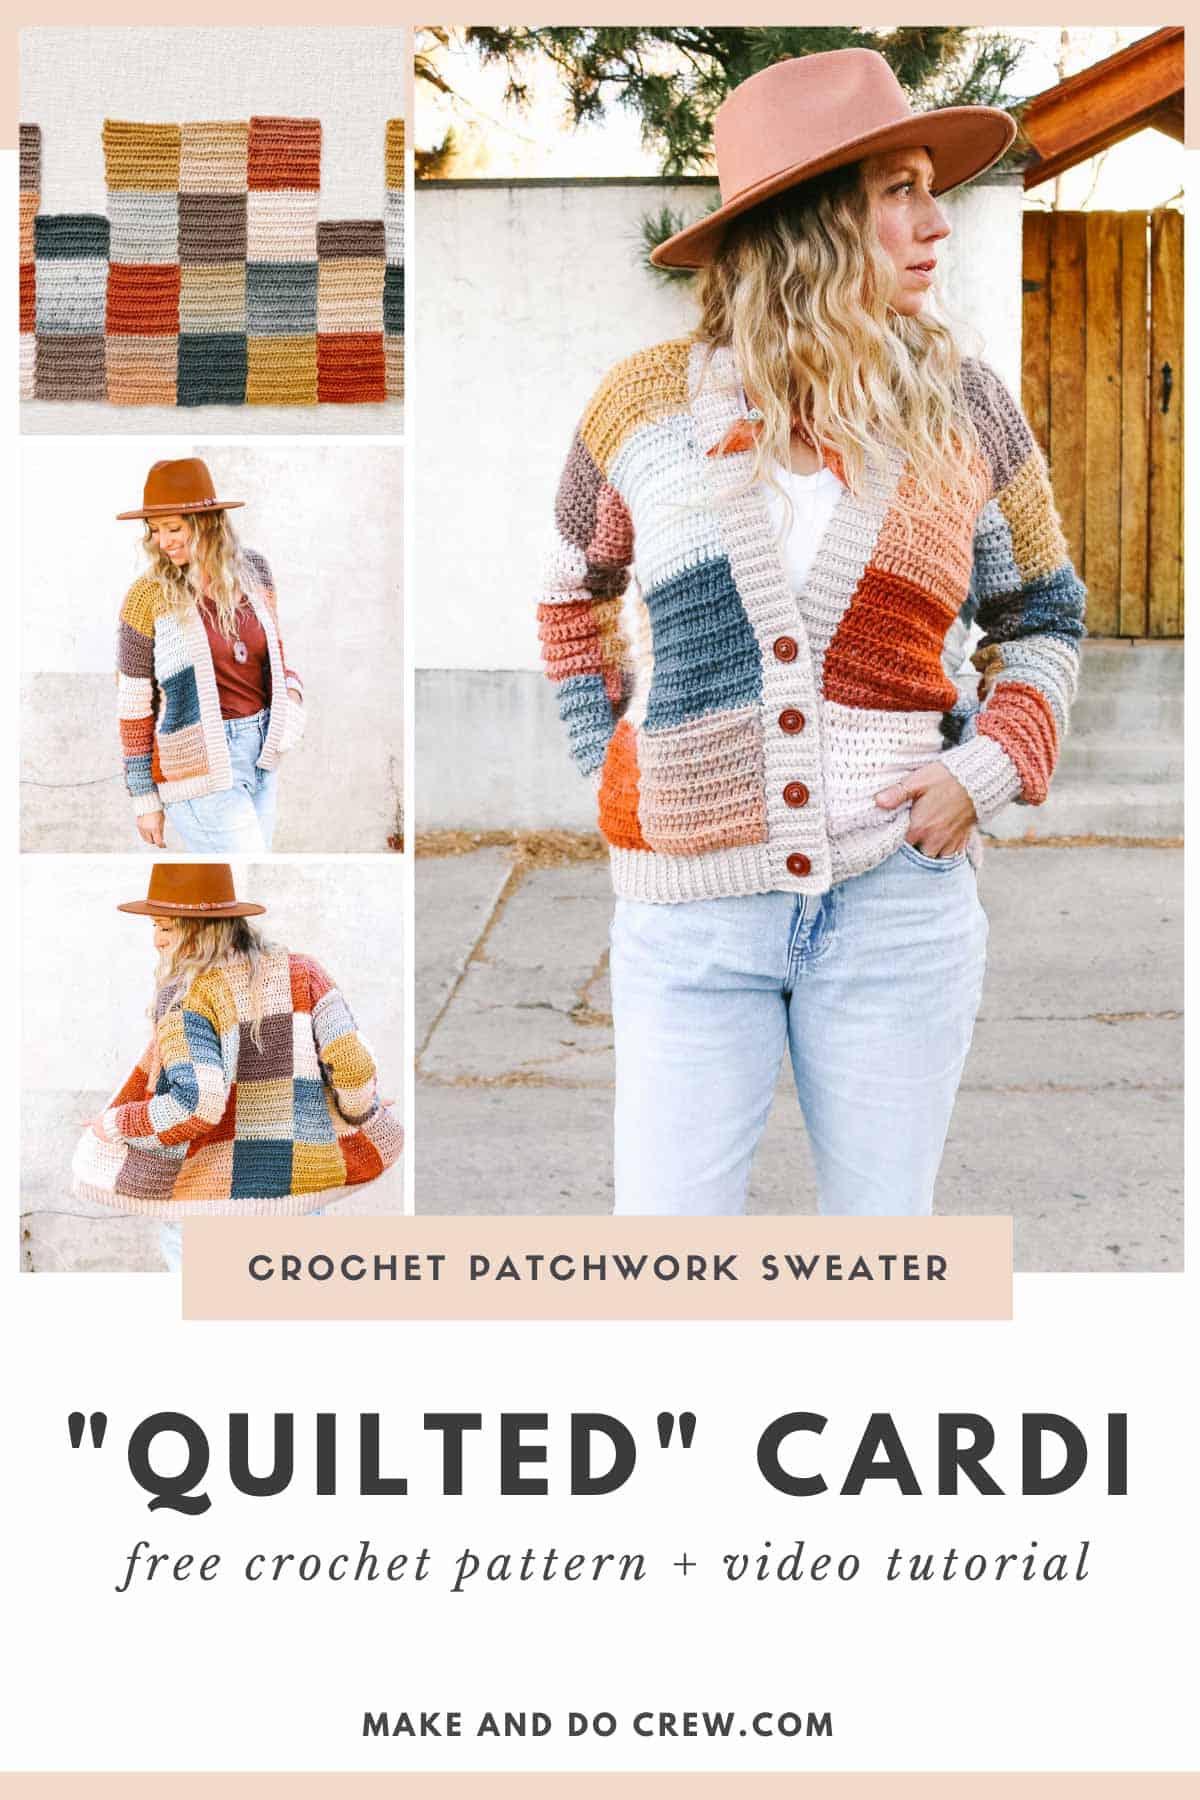 Blonde woman wearing a colorful patchwork cardigan, light blue jeans and a brown hat. Her left hand is in her pocket. There is another image of her showing off the back of the cardigan, and an in-progress image of how the crochet cardigan is made.